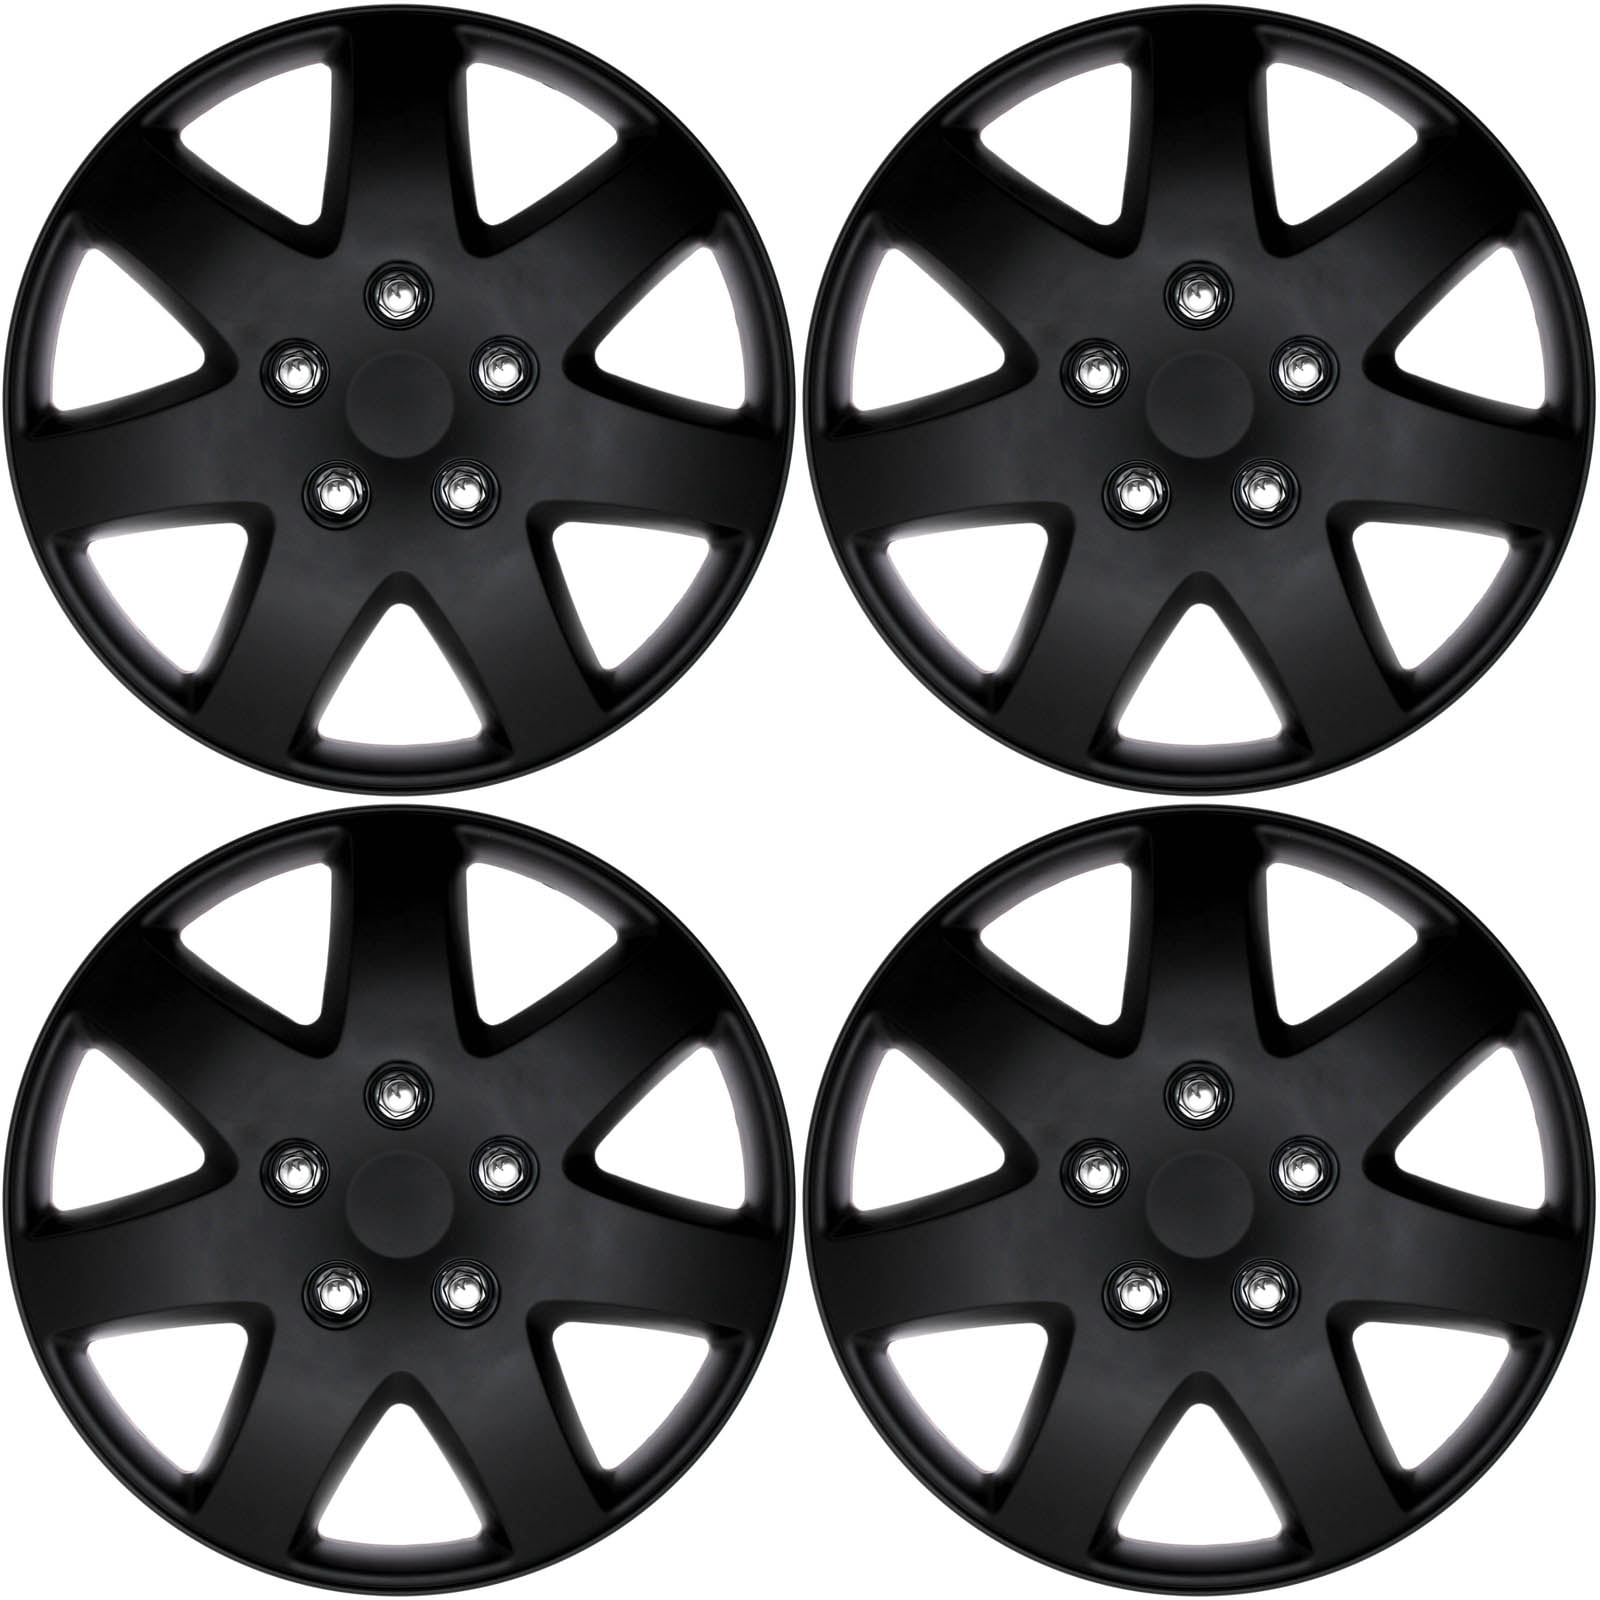 Deluxe Gloss Black 16in Wheel Cover Hubcaps for Monte Carlo Style Look ABS